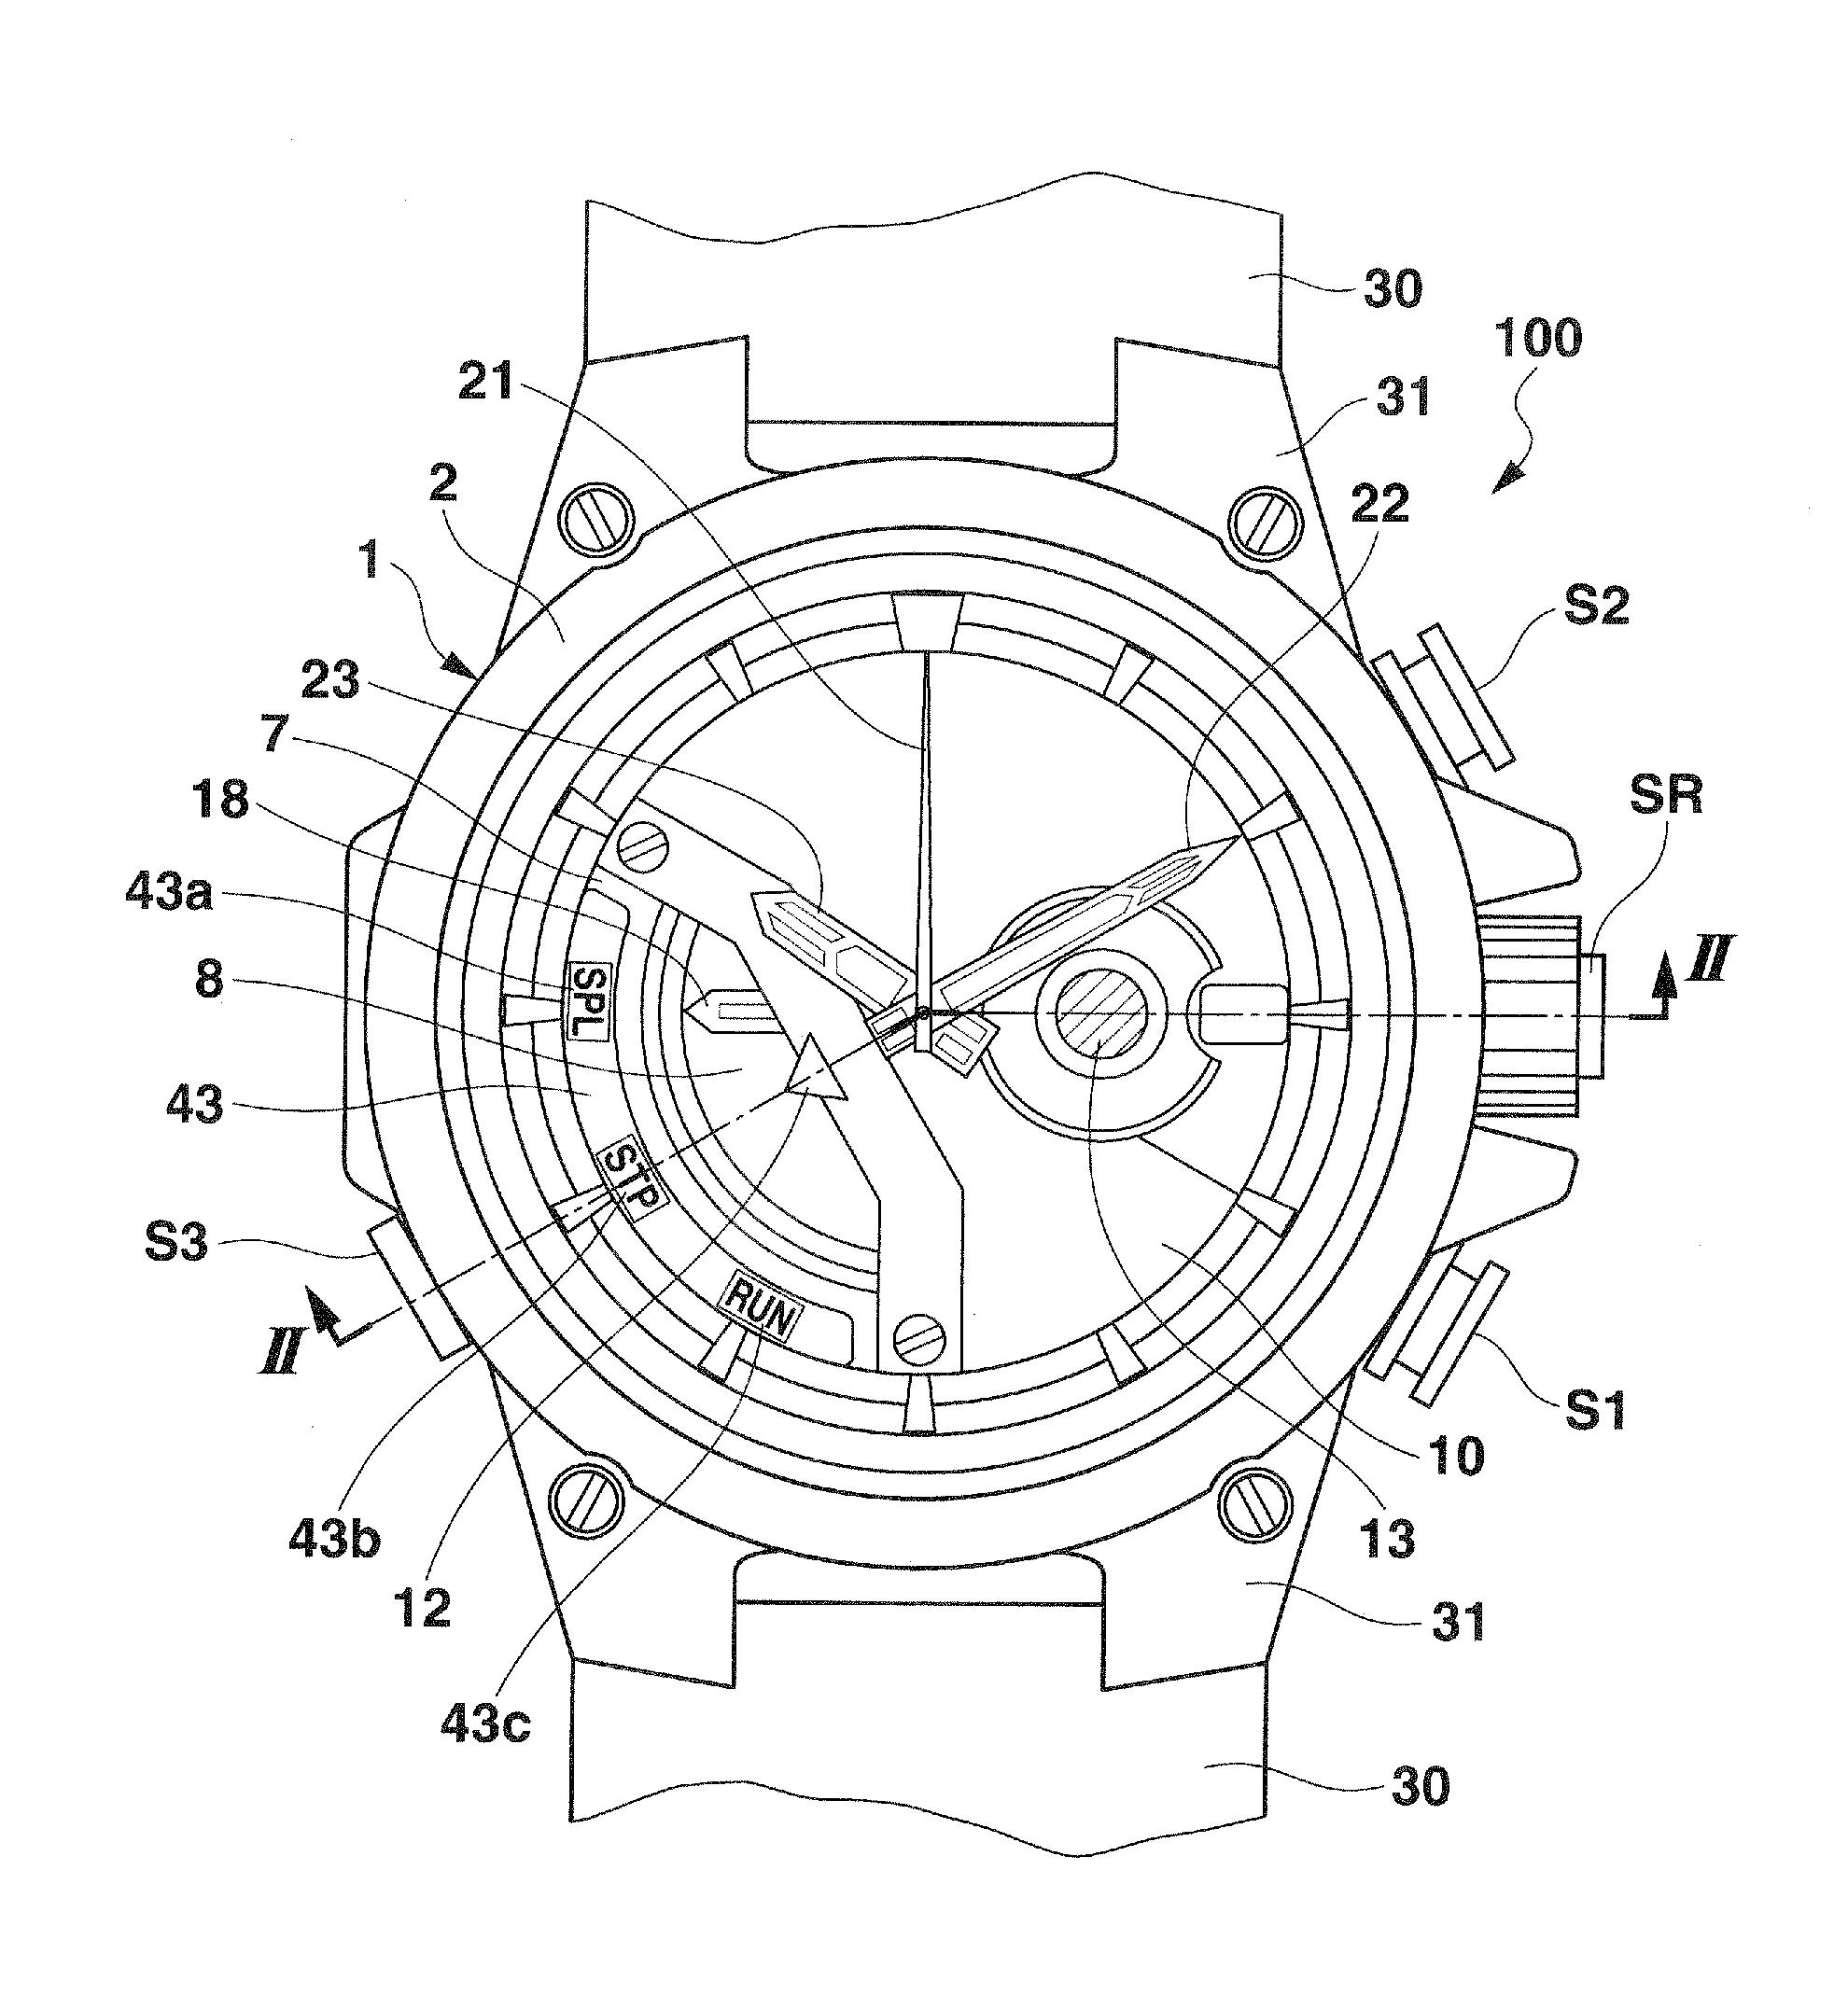 Dial plate structure and watch